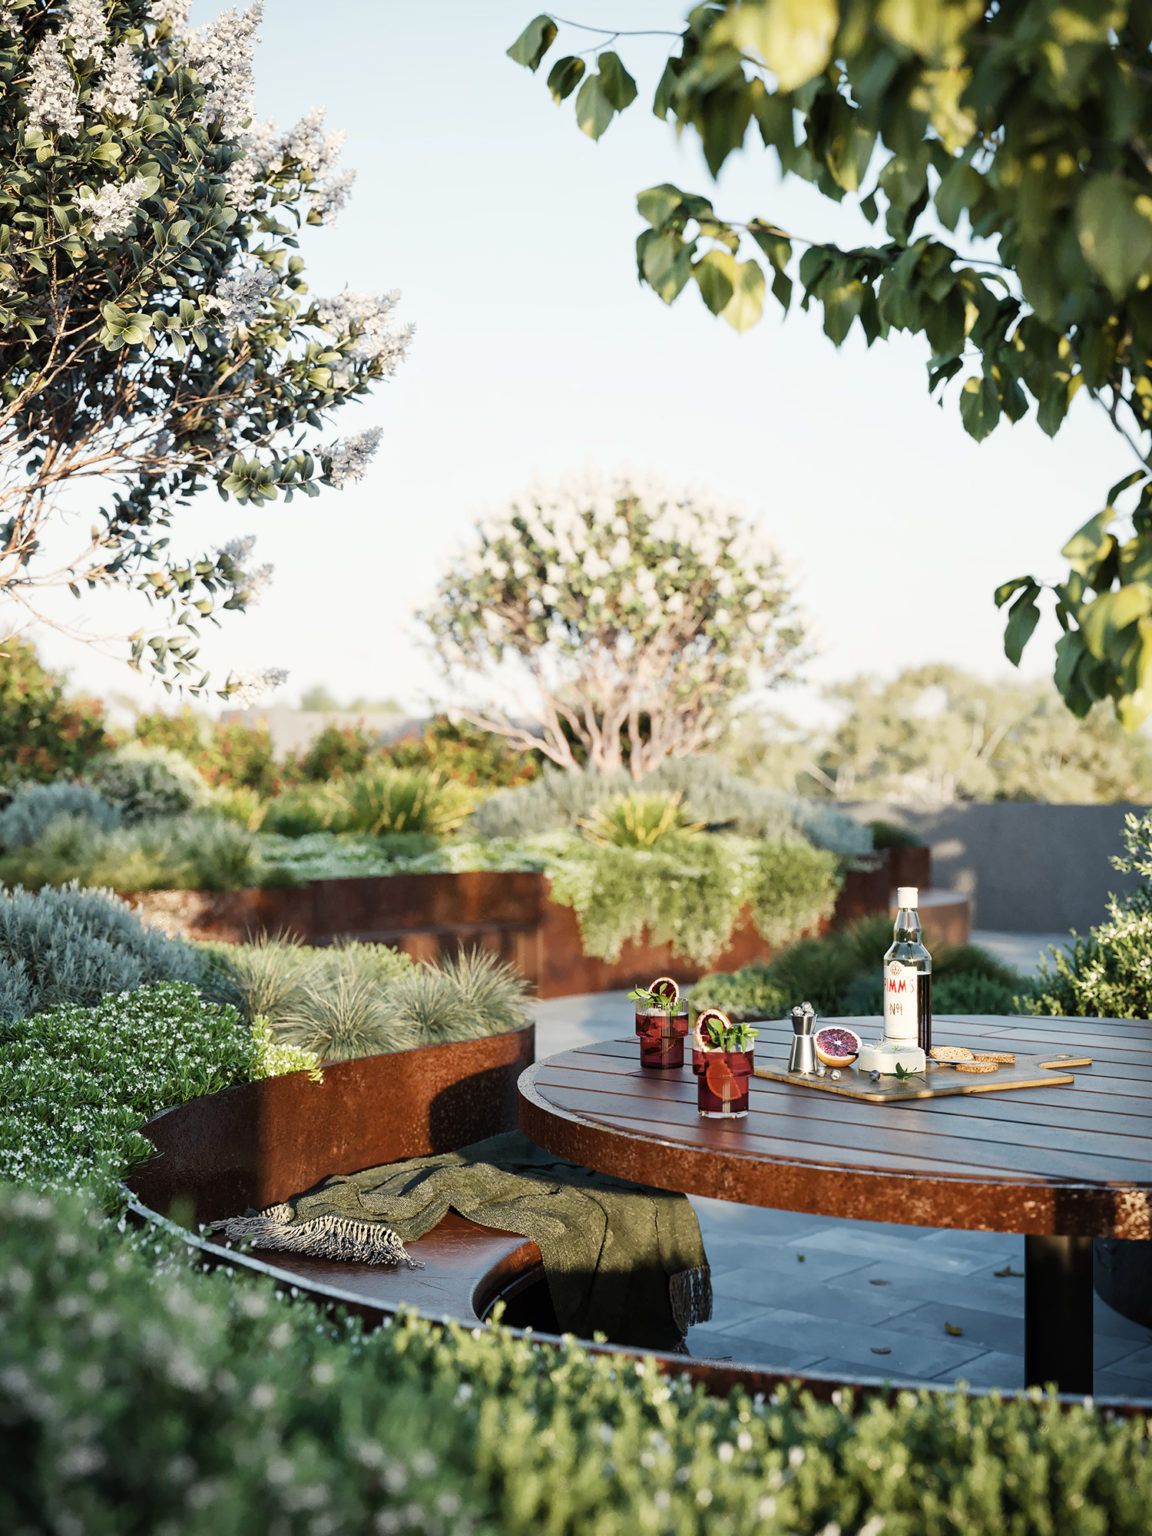 Contemporary Gardens: A New Take on Outdoor Spaces